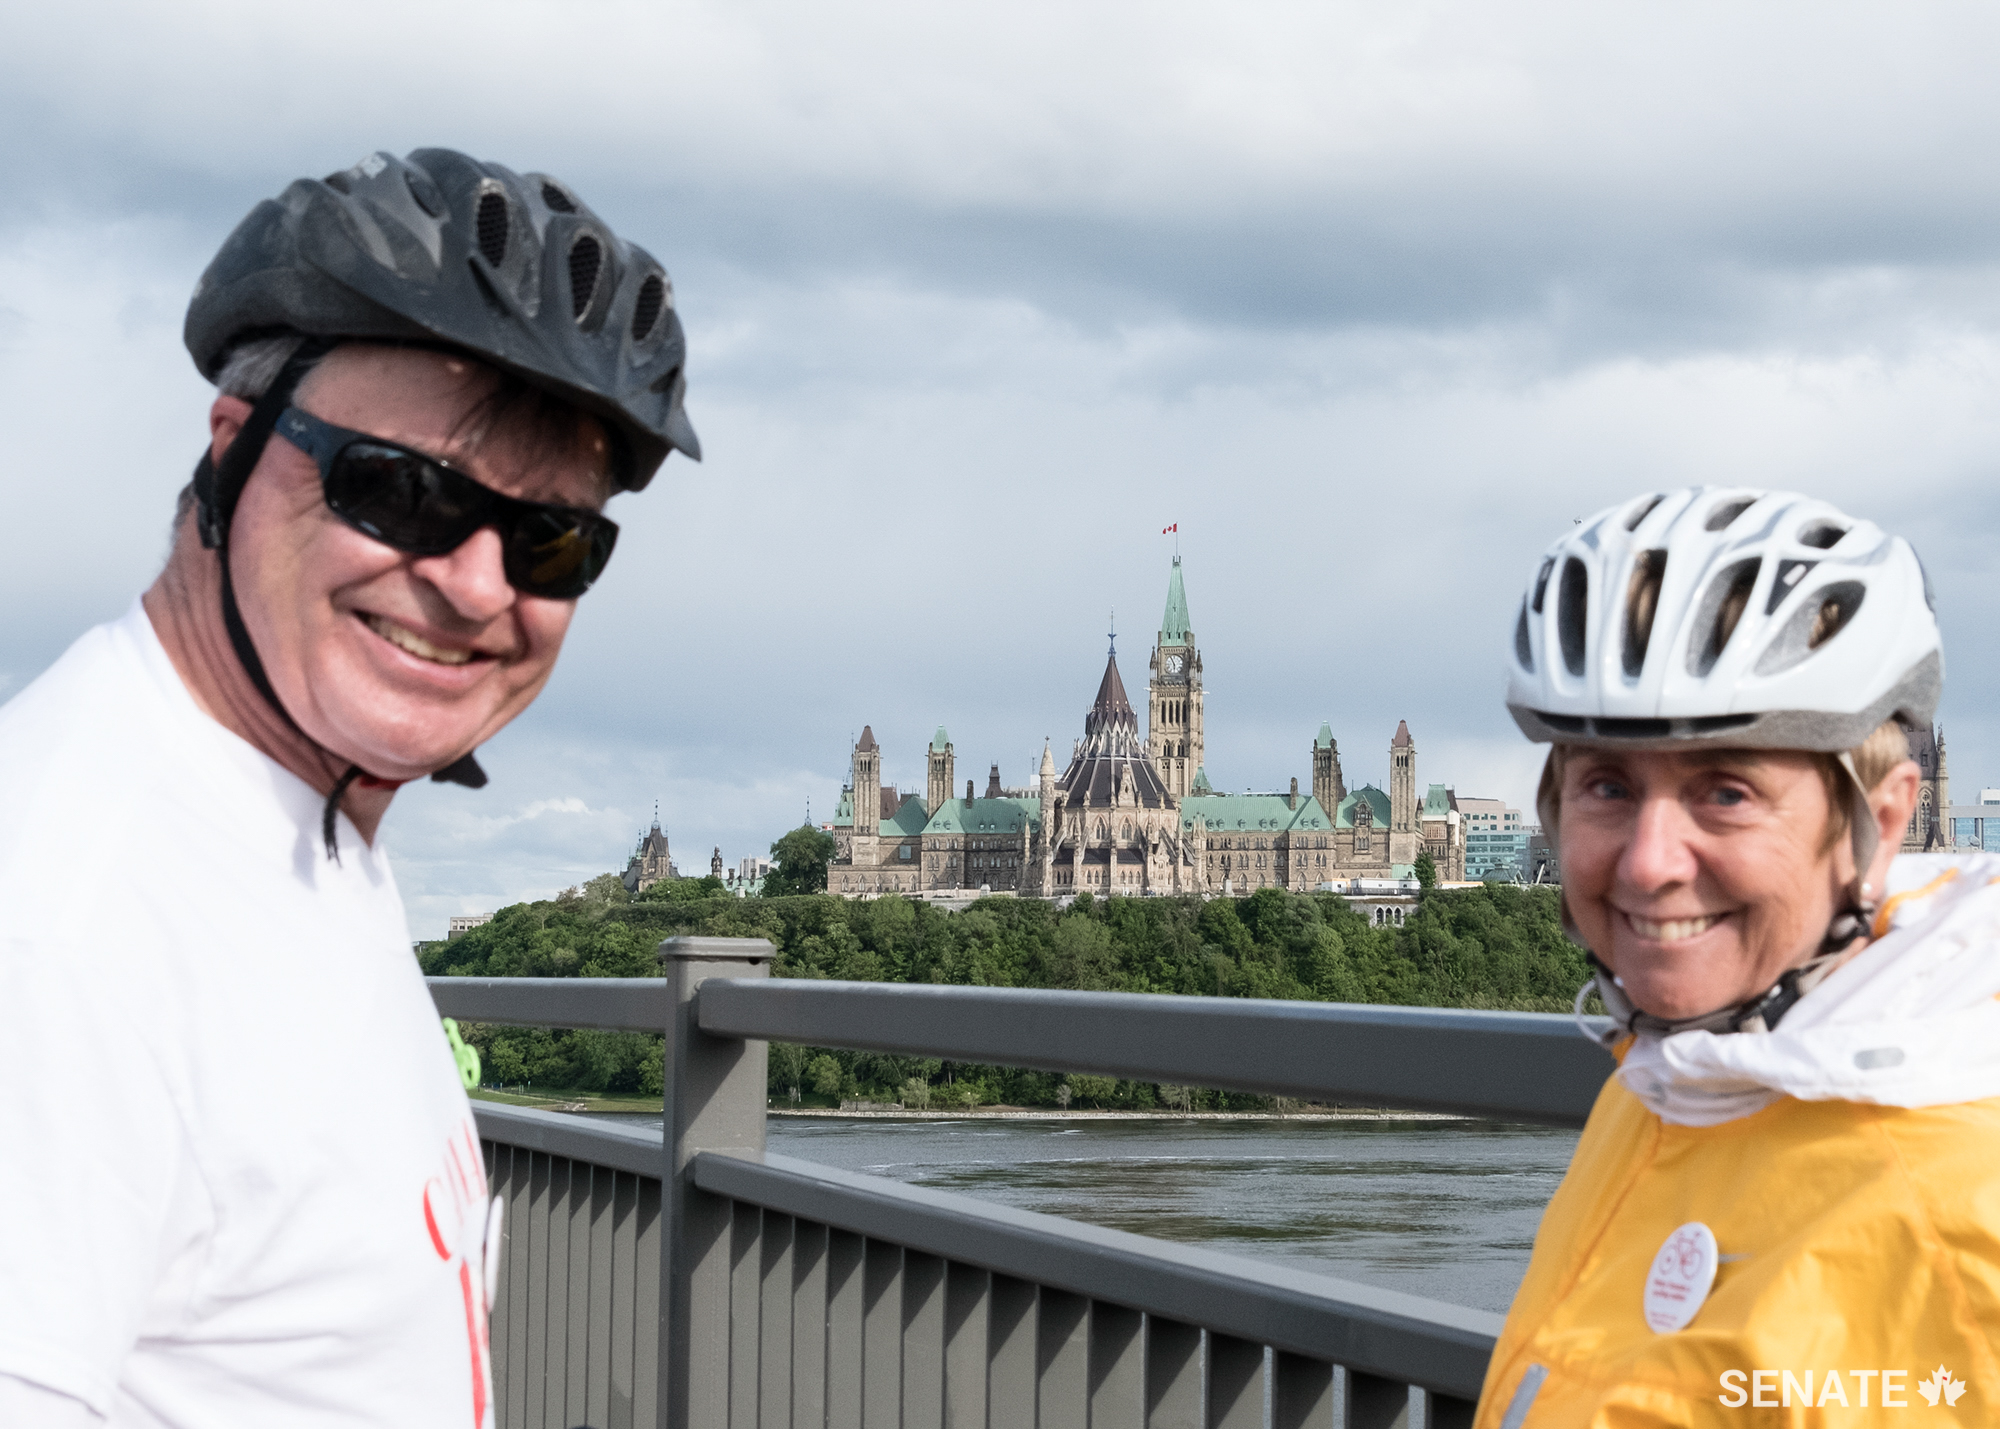 Senators Patterson and Raine share a moment with Parliament in the background.